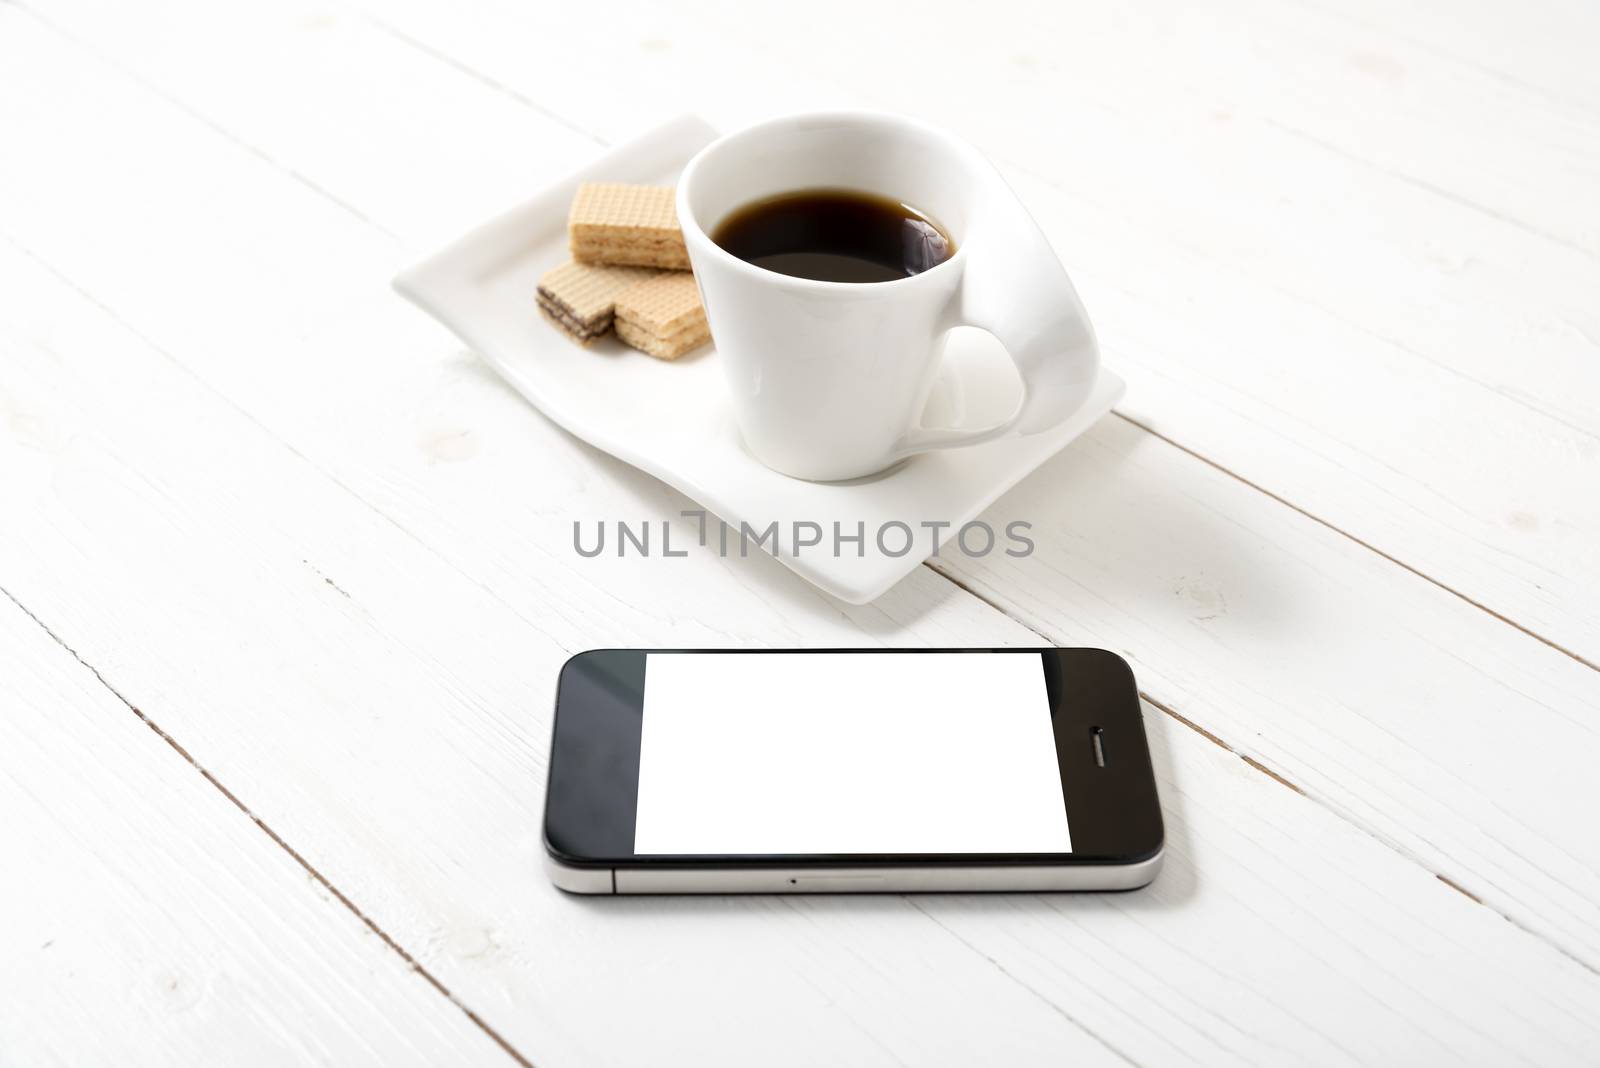 coffee cup with wafer and phone on white wood background